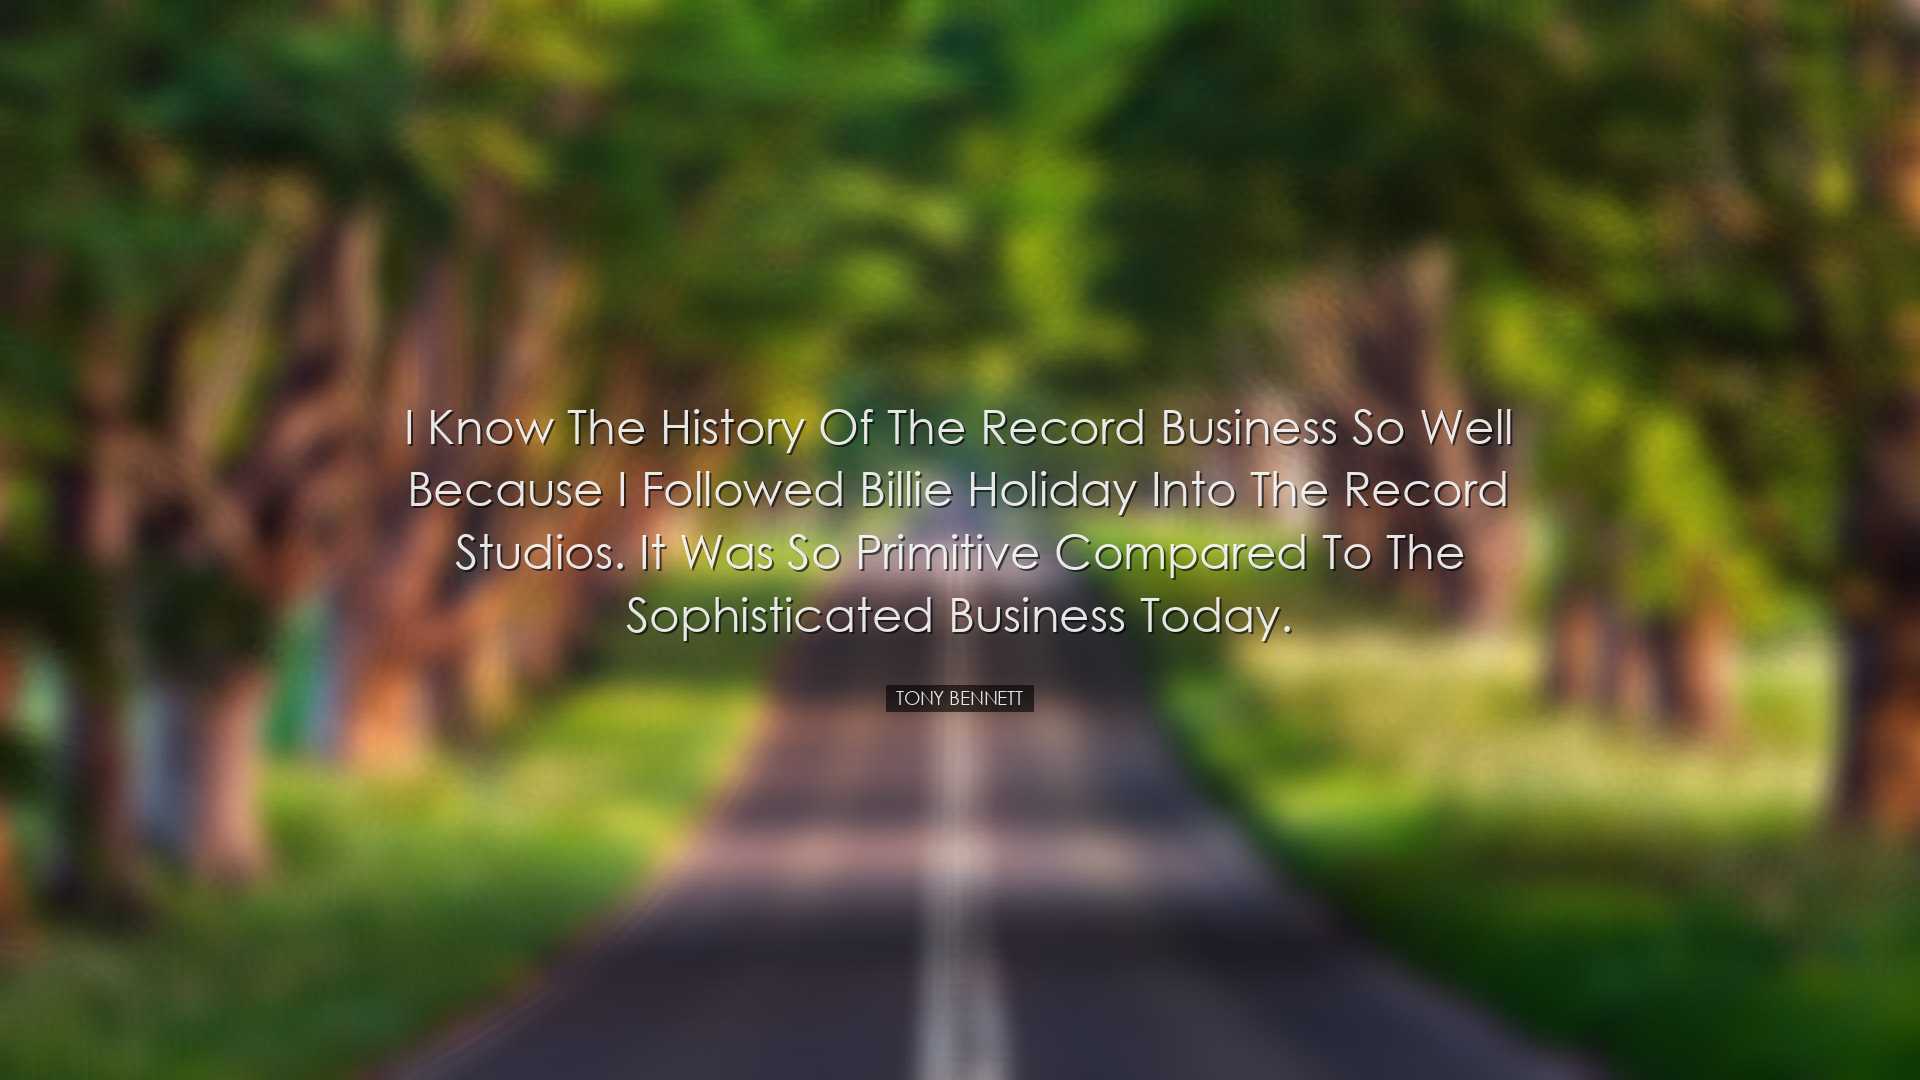 I know the history of the record business so well because I follow